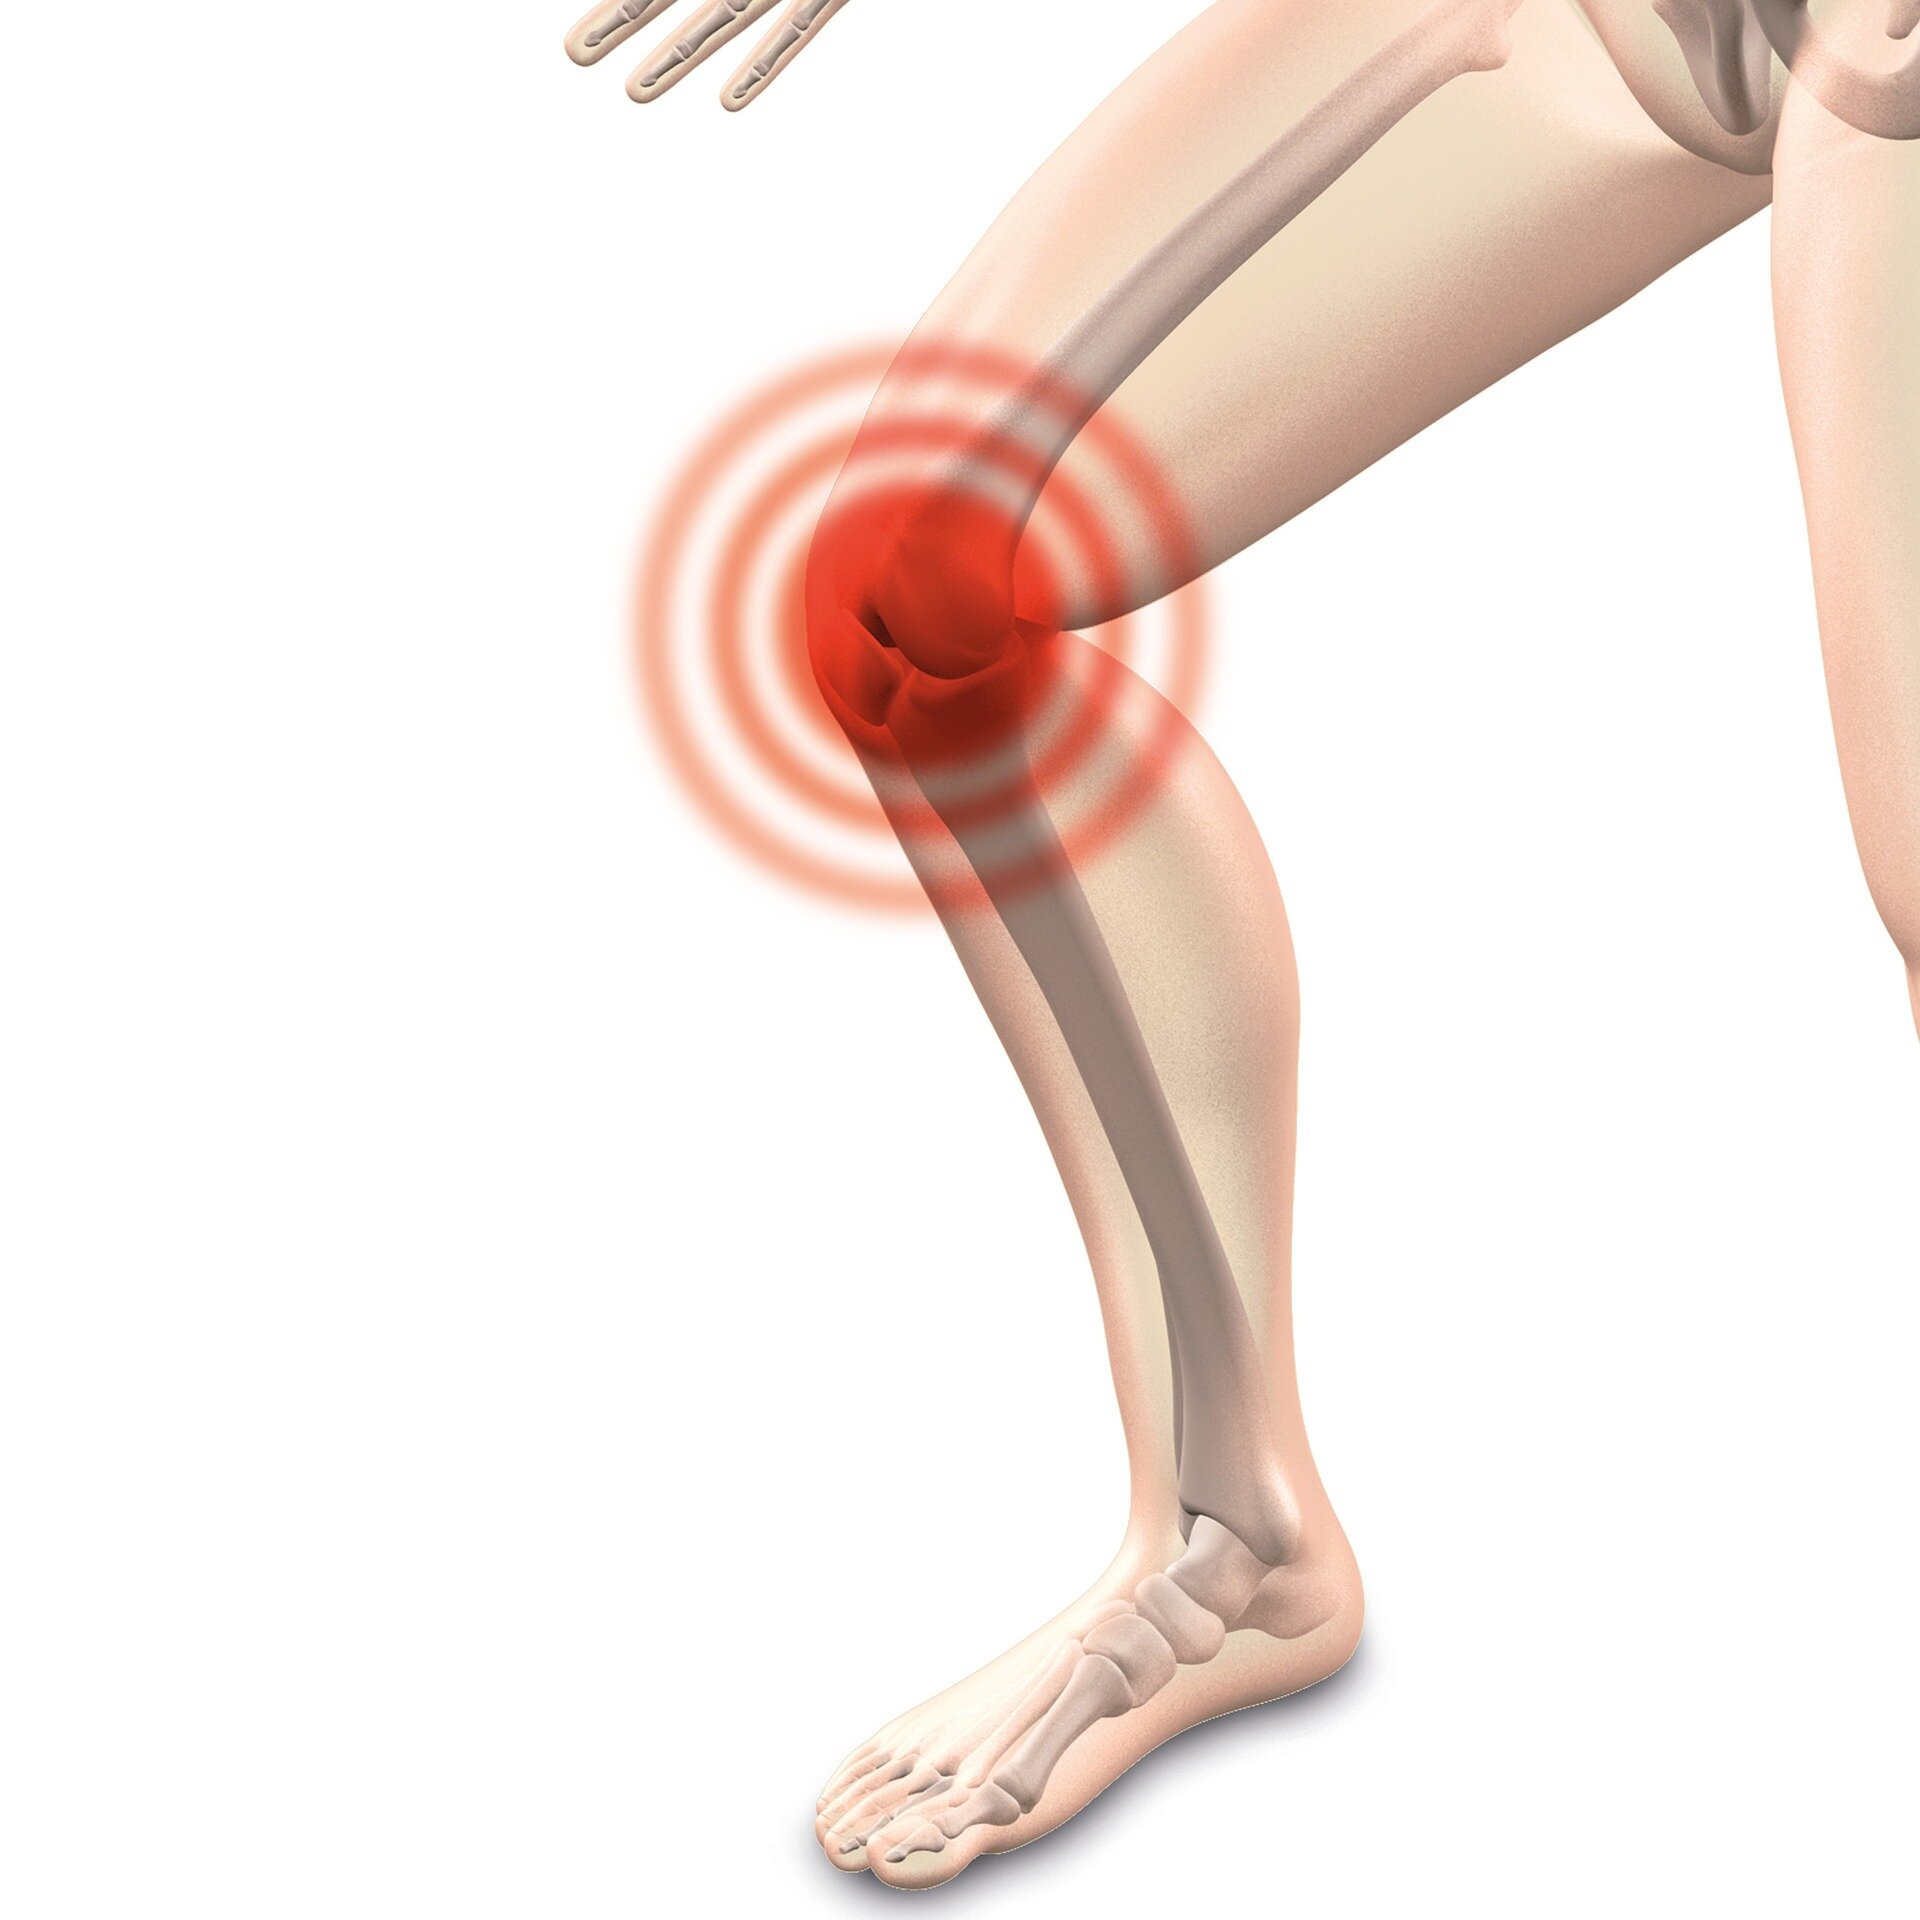 A new way to control pain after knee replacement surgery